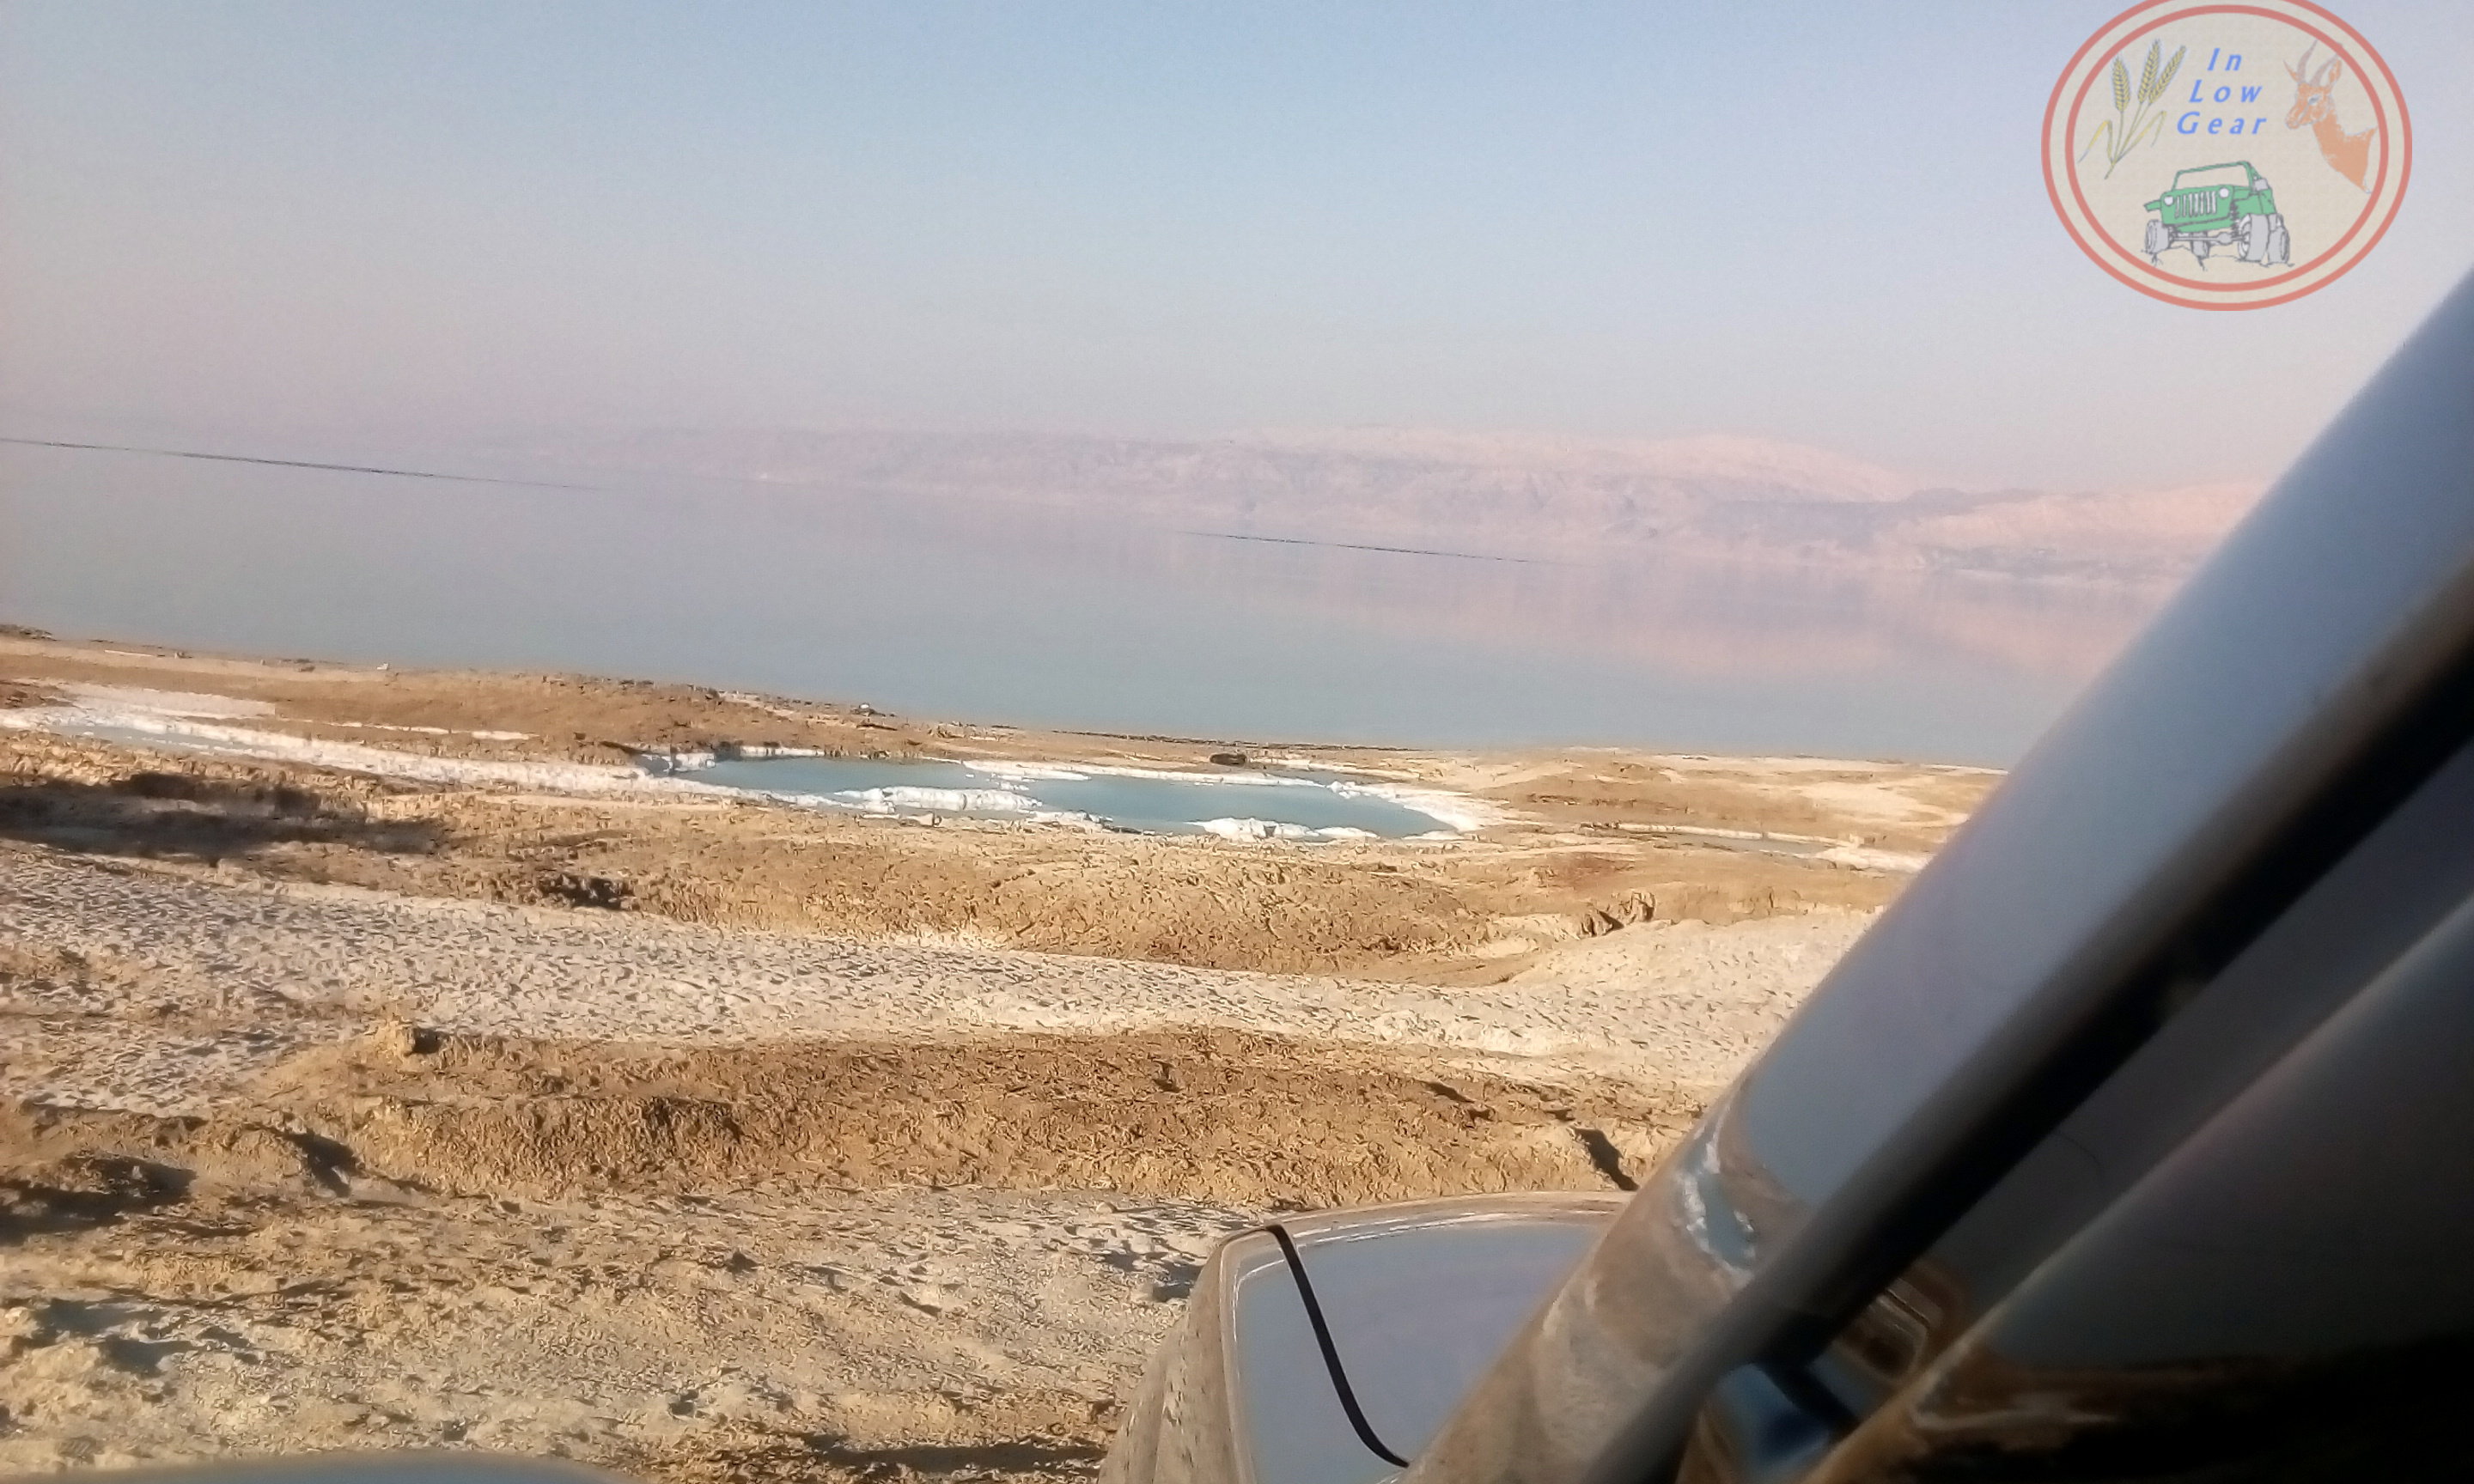 Dead Sea mud and natural beach Adventure 4x4 jeep tours